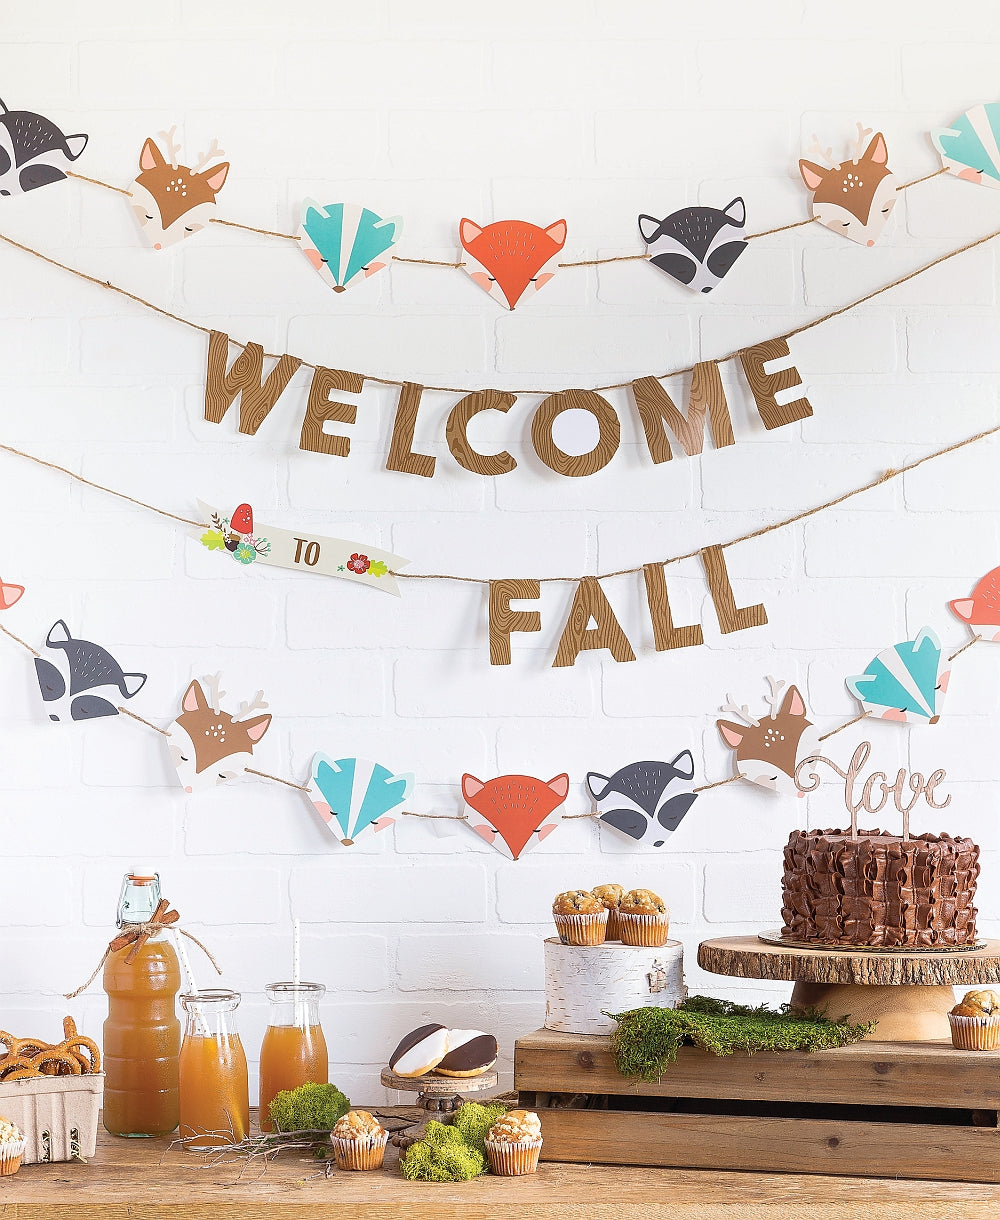 Welcome Fall Banner